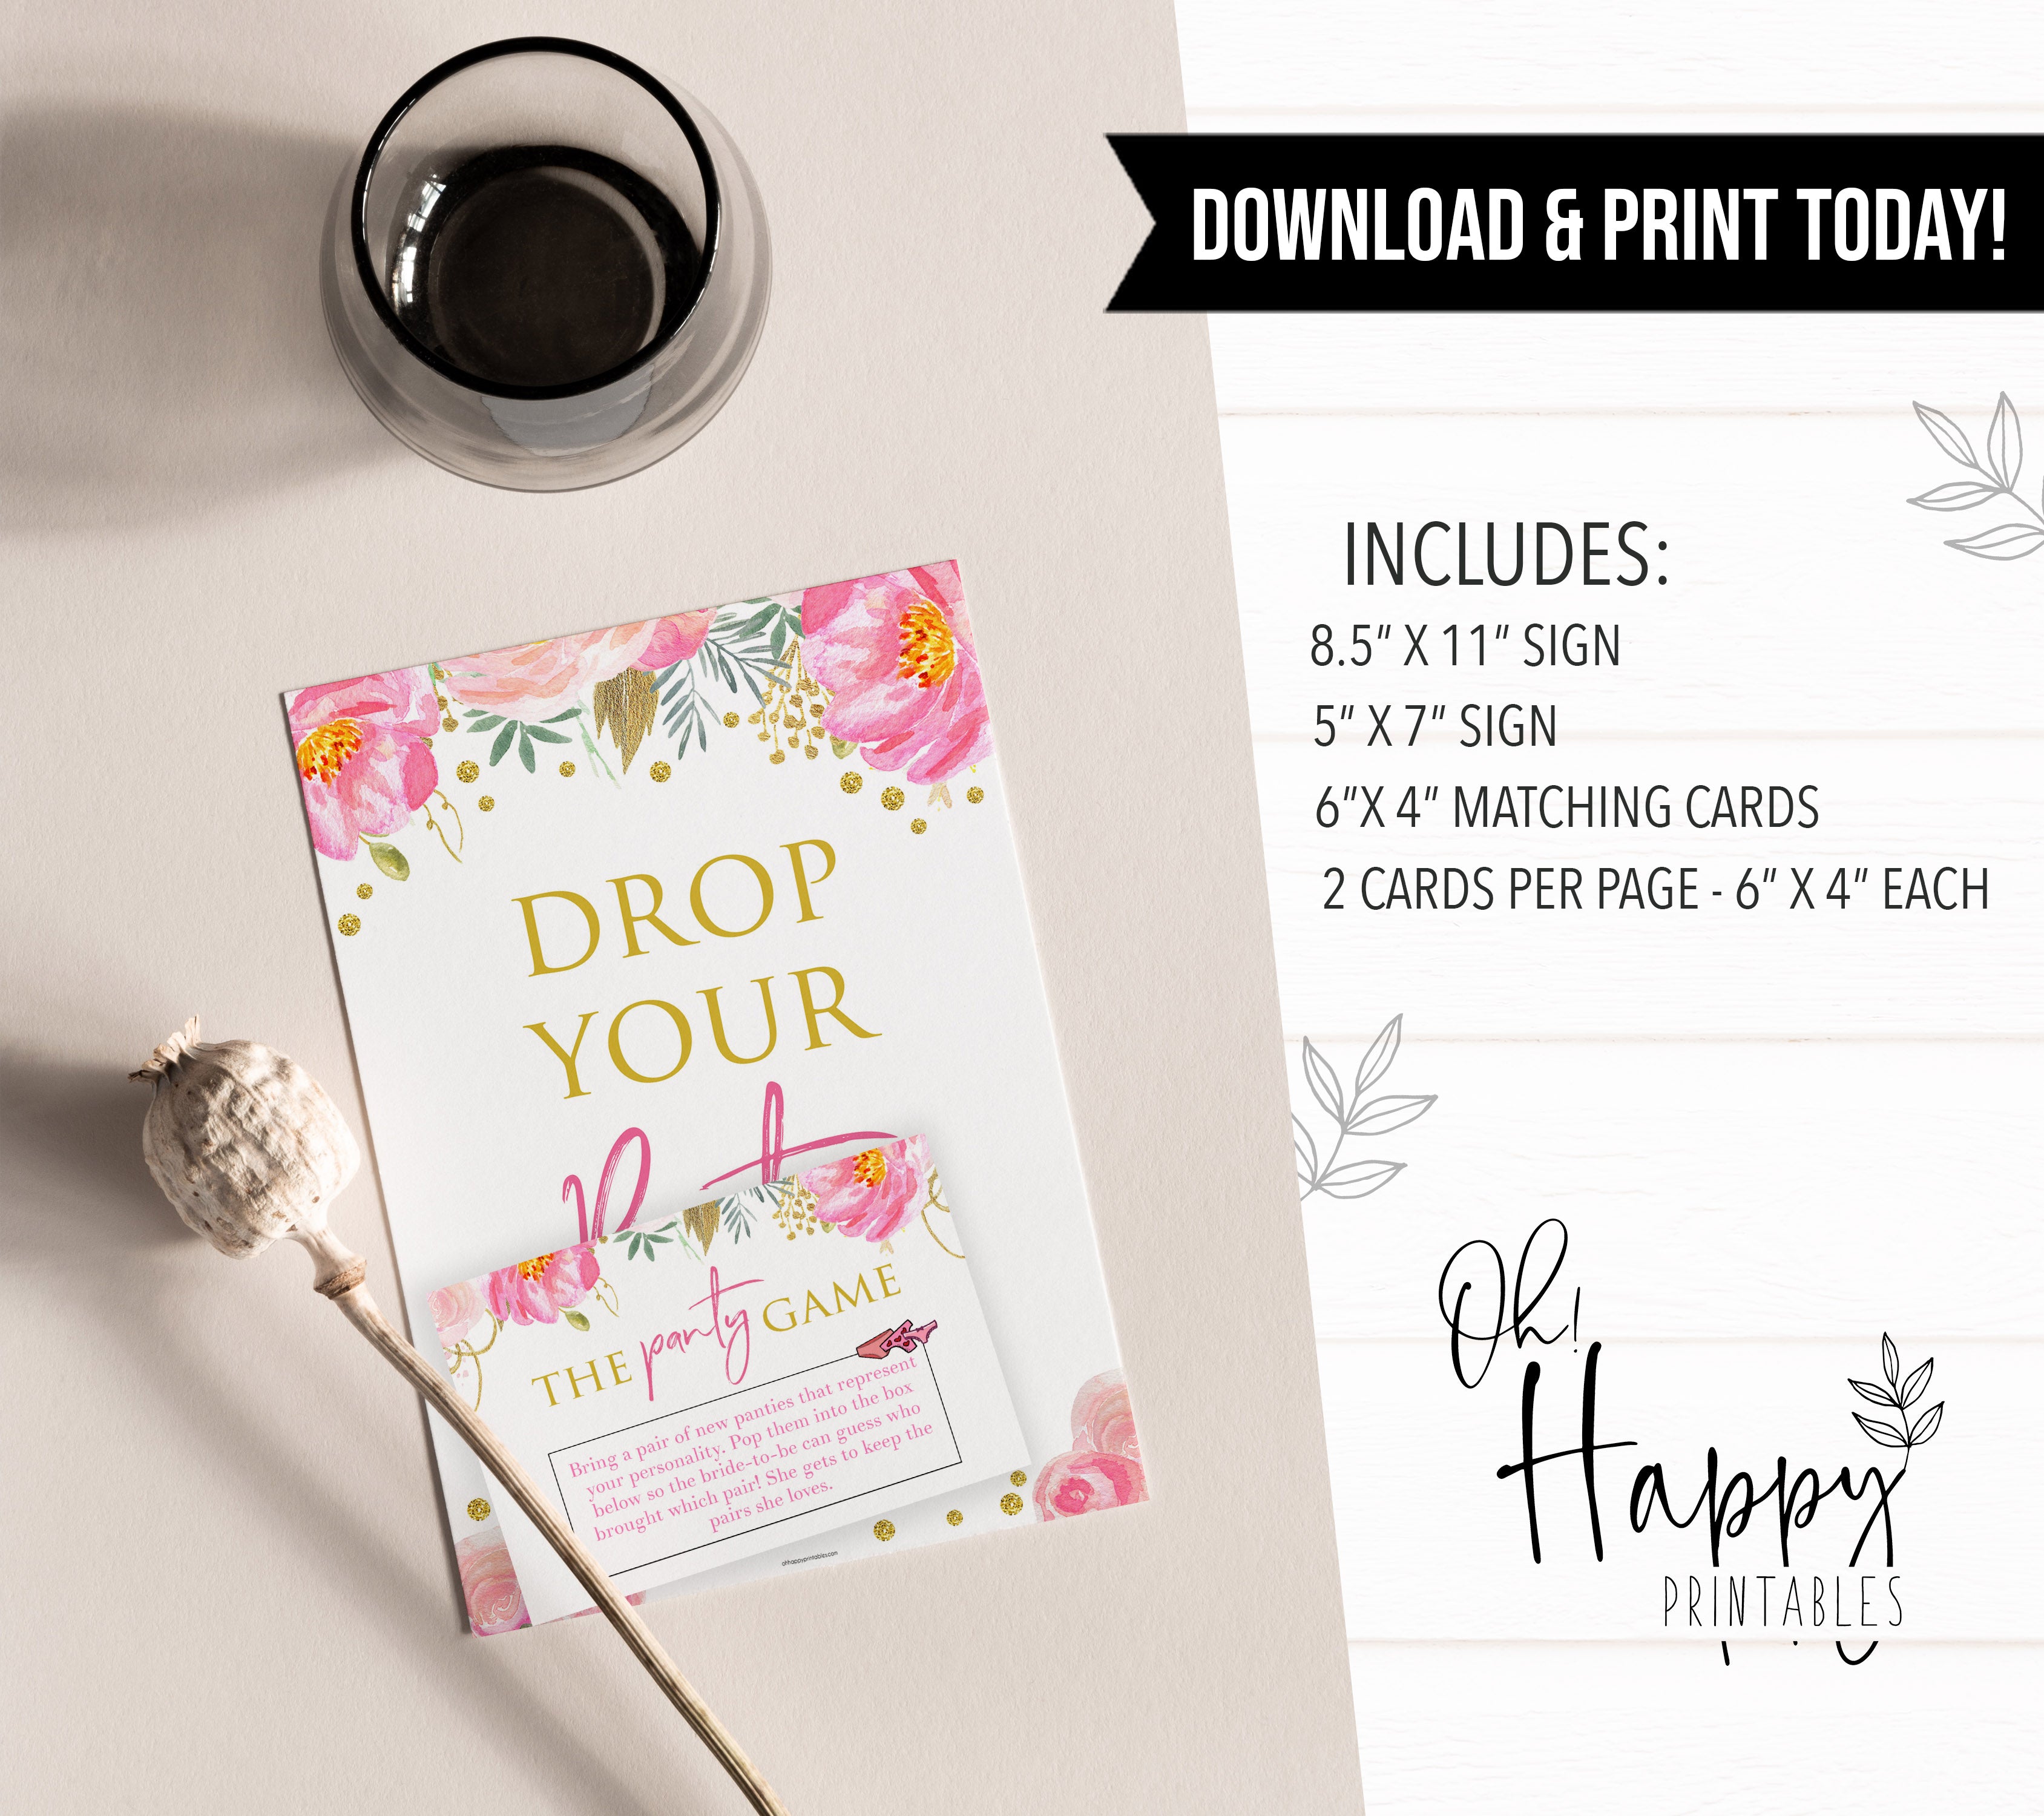 drop your panties game, do you know the bride game, bachelorette scattergories game, dirty minds game, dirty little secrets game, dirty emoji pictionary game, date night jar, printable bridal shower games, blush floral bridal shower games, fun bridal shower games